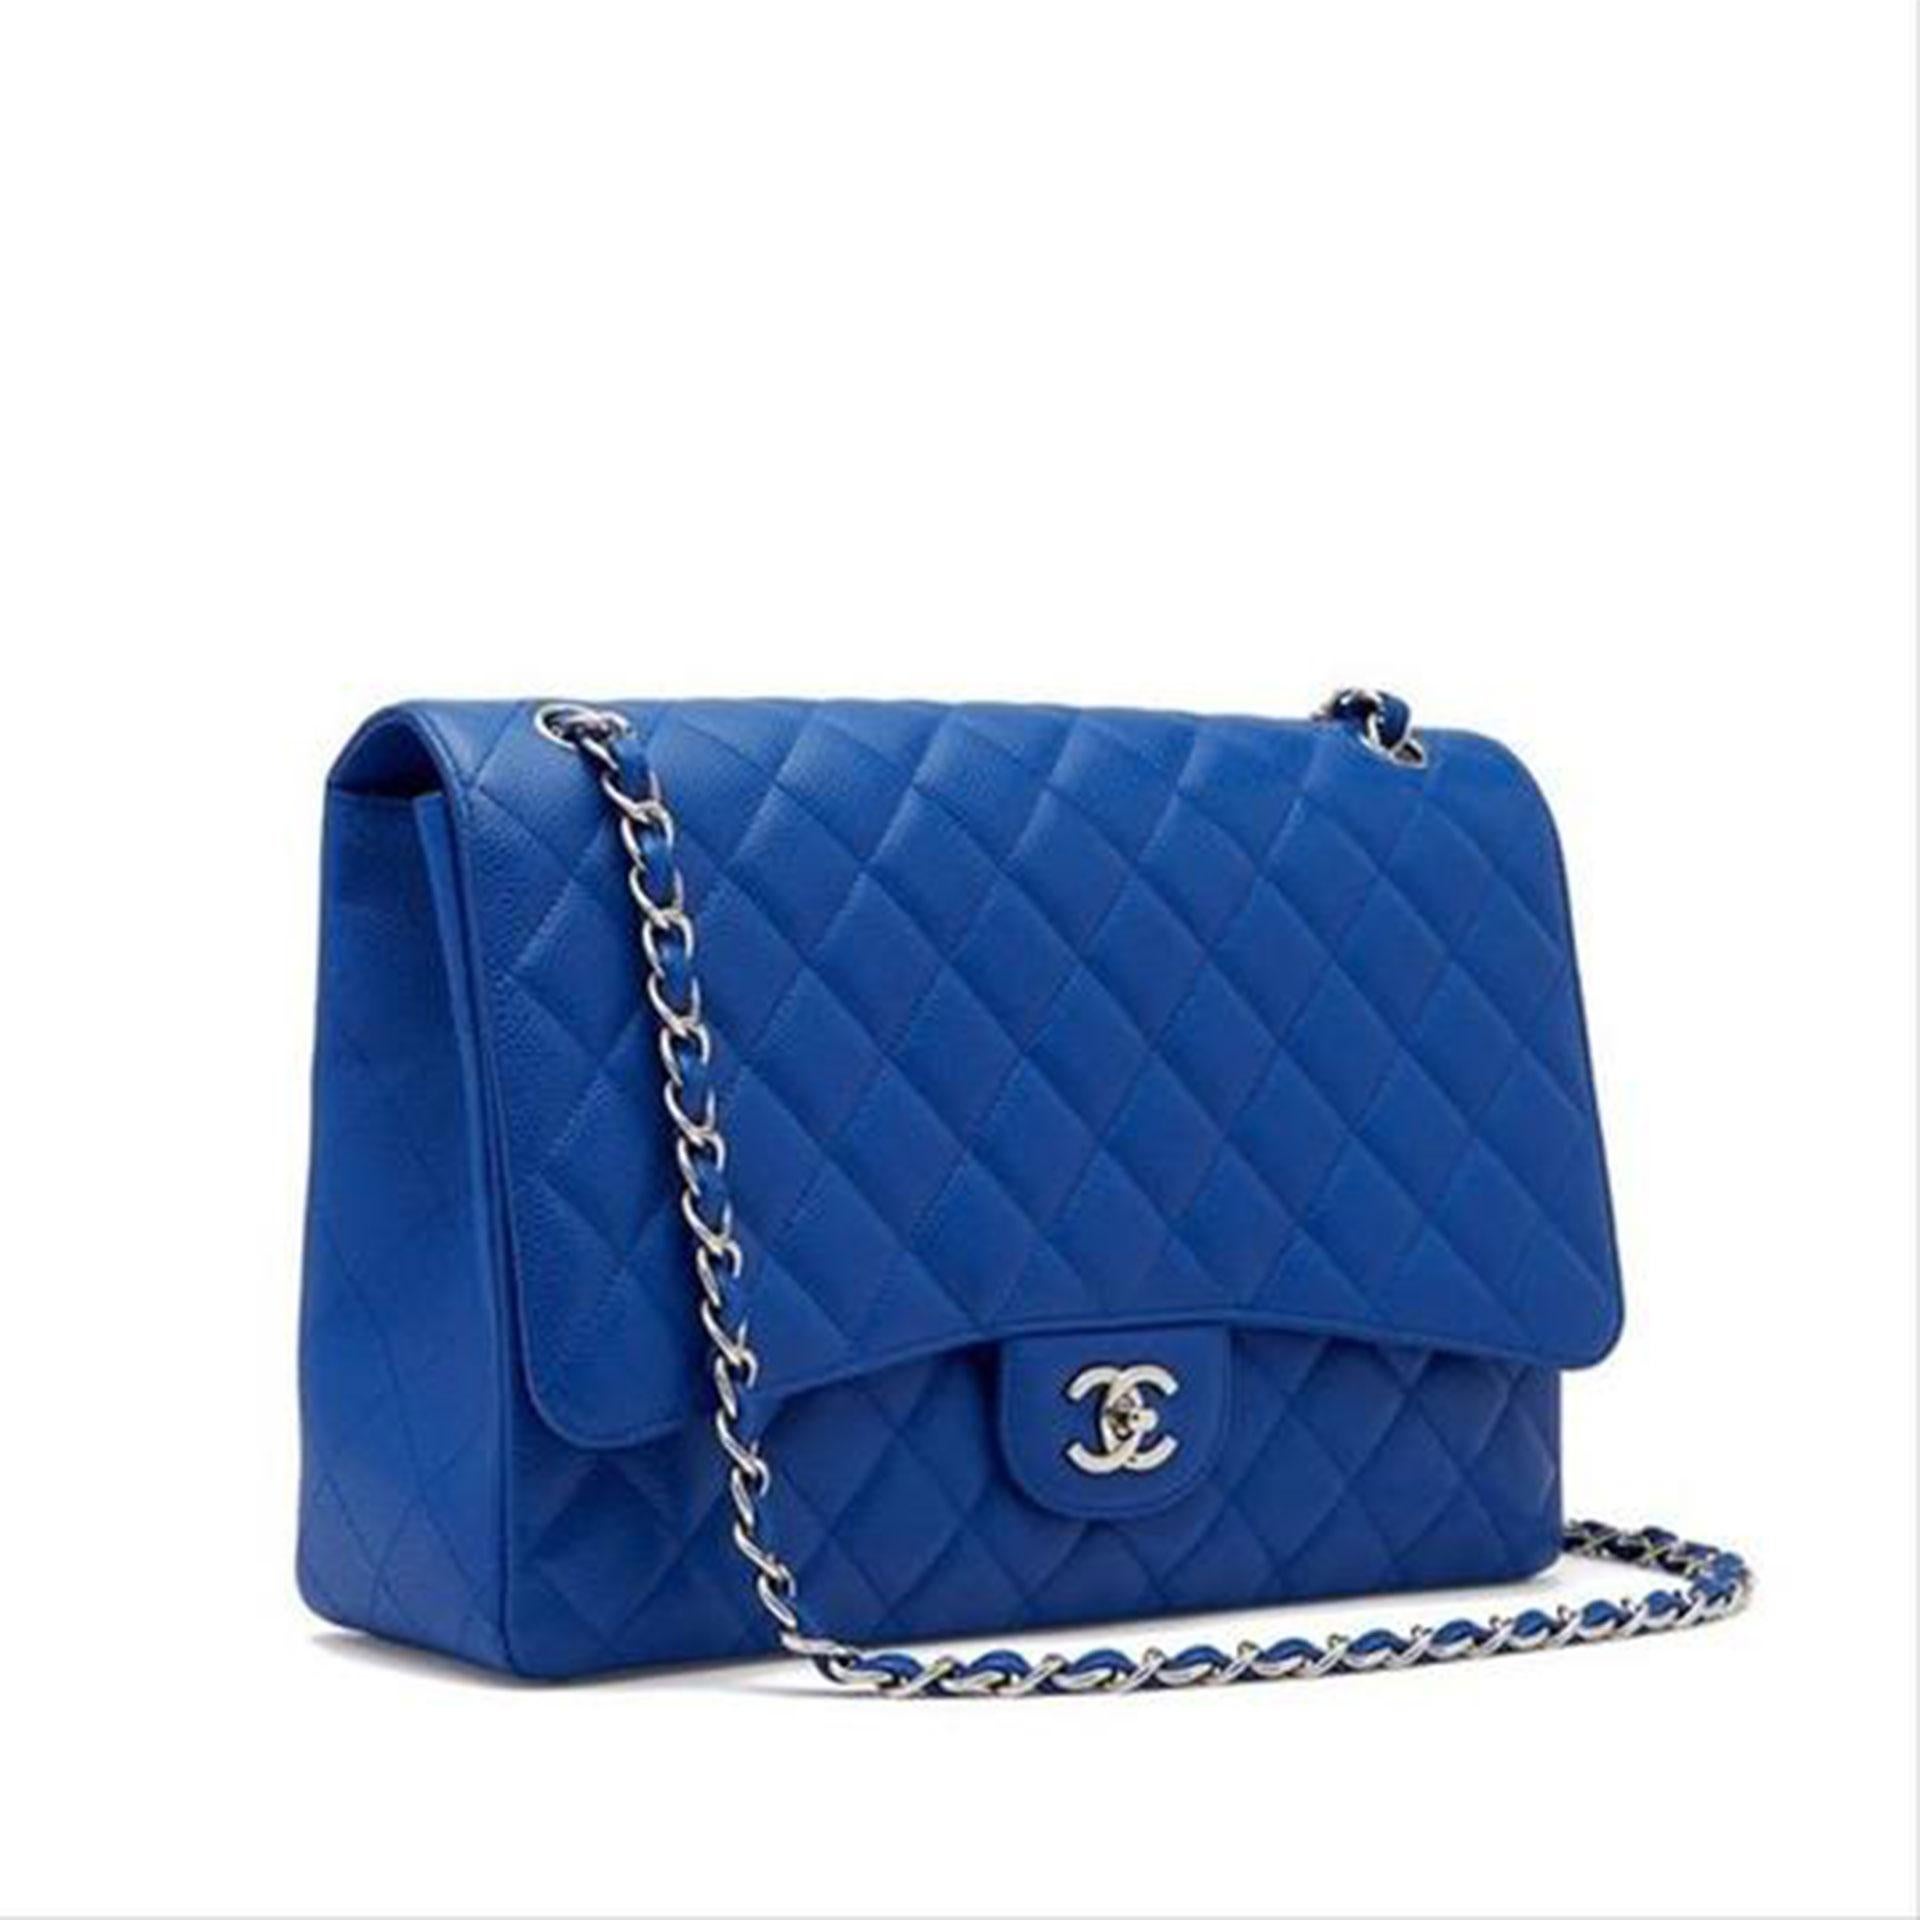 Chanel Rare Limited Edition Caviar Blue Roi Maxi Classic Flap Bag

Year: 2009 {VINTAGE 13 Years}
Silver hardware
Diamond quilted caviar leather
Classic interwoven chain strip
CC turn-lock closure
Strap drop: 9